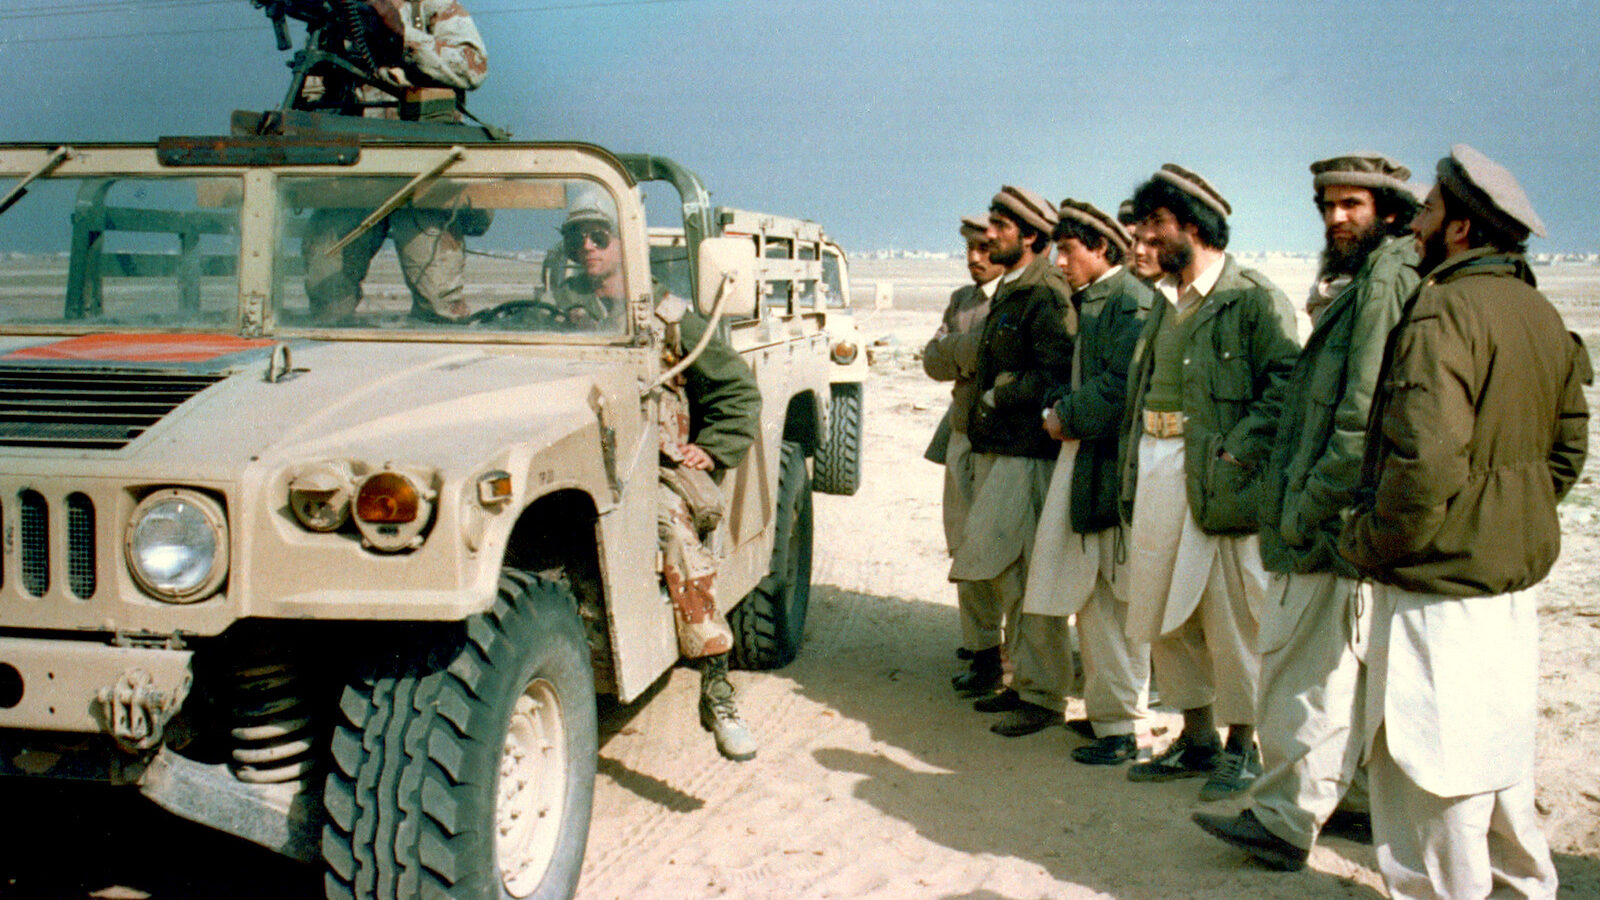 A group of Afghan mujahedeens, Islamic guerrillas, look over a U.S. Marine humvee in eastern Saudi Arabia, Monday, Feb. 11, 1991. The Marines visited a camp consisting of about 300 mujahedeens who have been asked by the Saudi government to help fight against Iraq in the Gulf War. (AP Photo/Department of Defense)